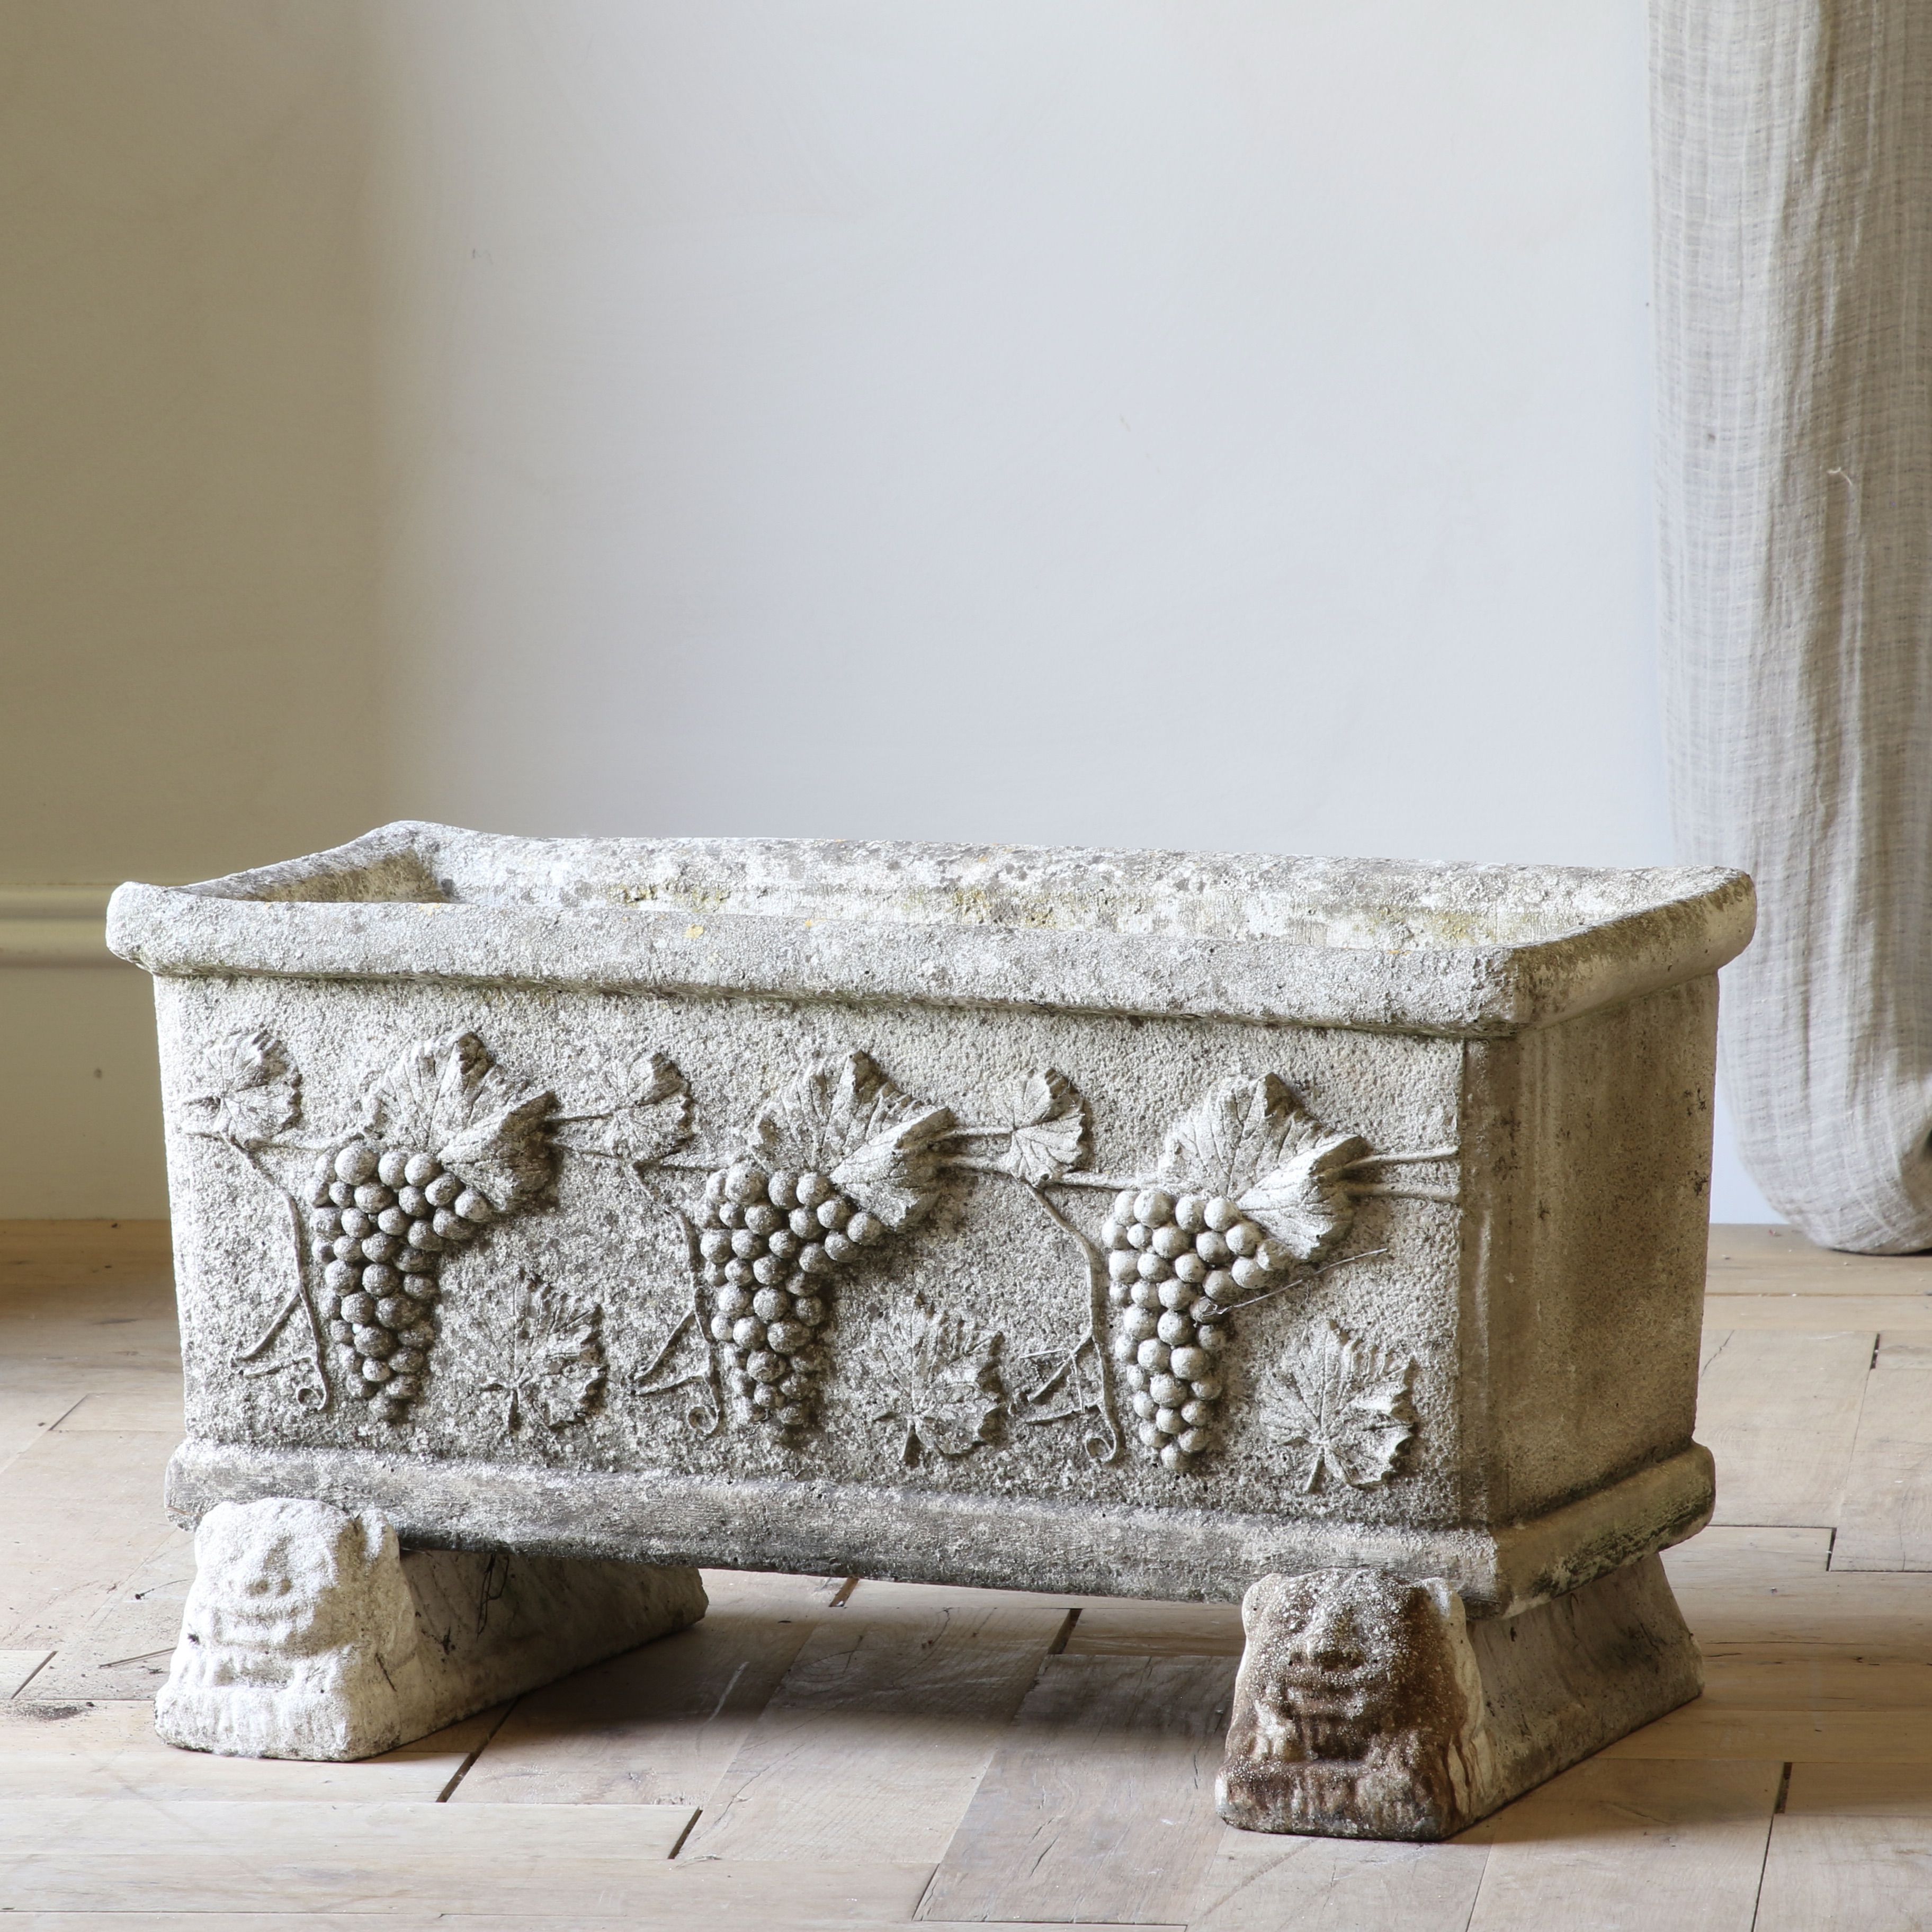 A French Reconstituted Marble Trough or Planter